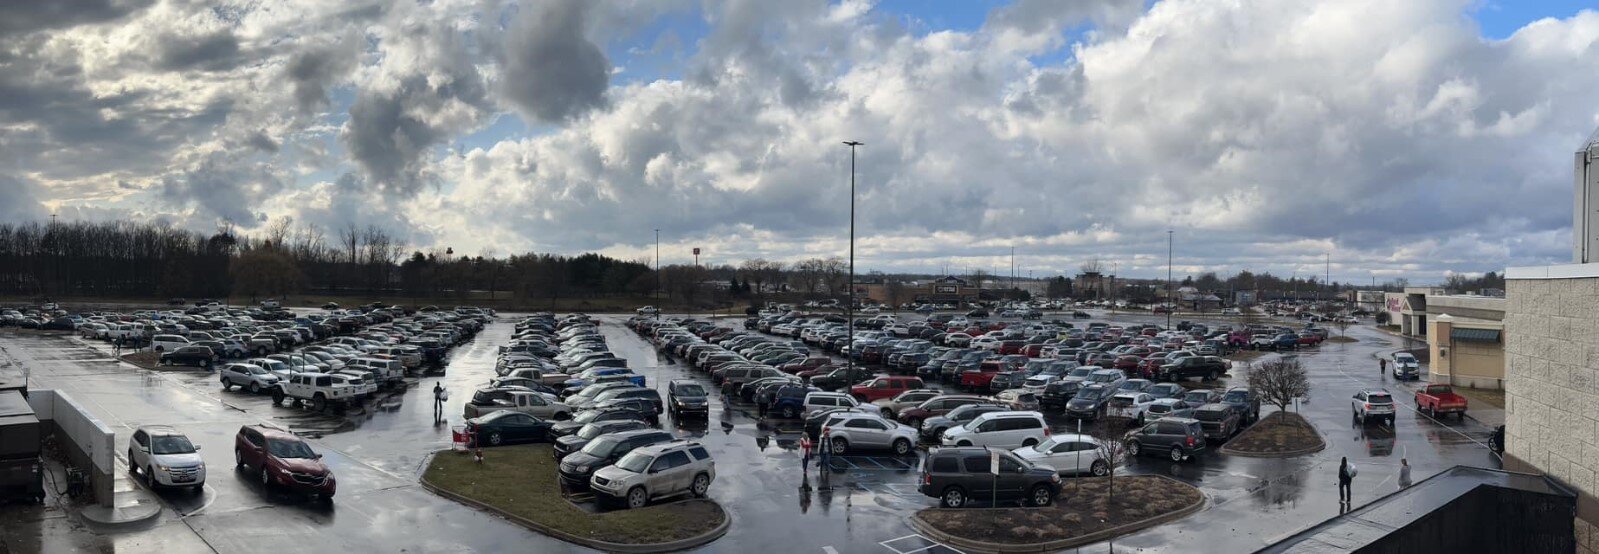 A full parking lot at the Midland Mall.